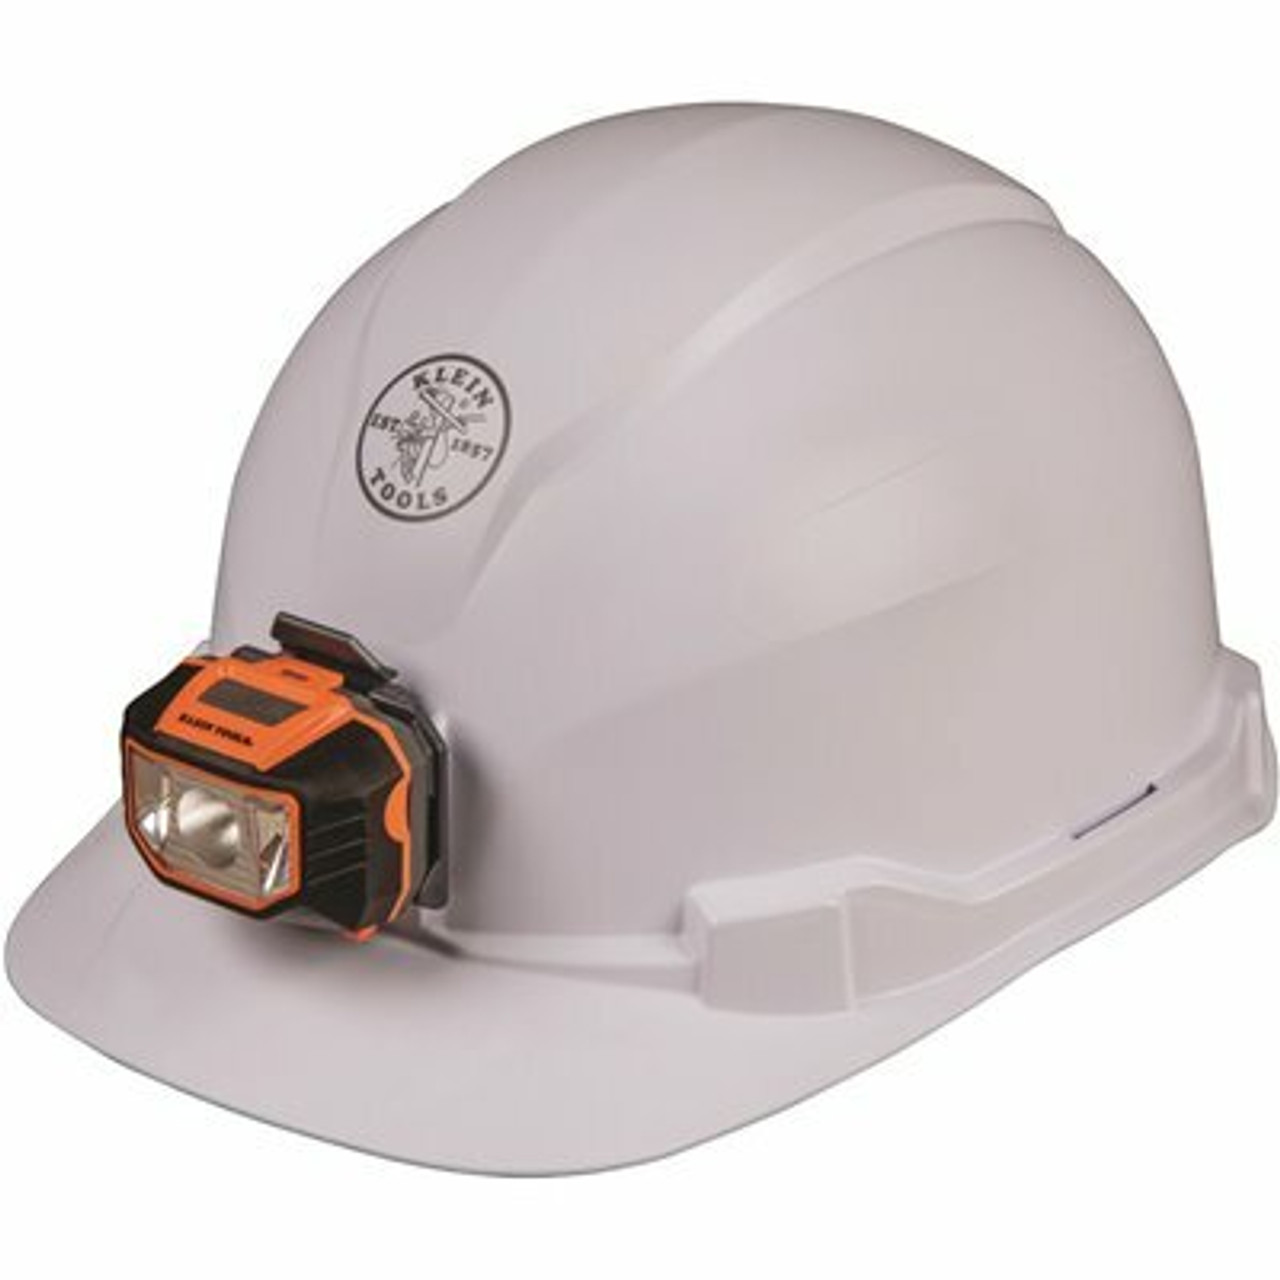 Klein Tools Hard Hat, Non-Vented, Cap Style With Headlamp